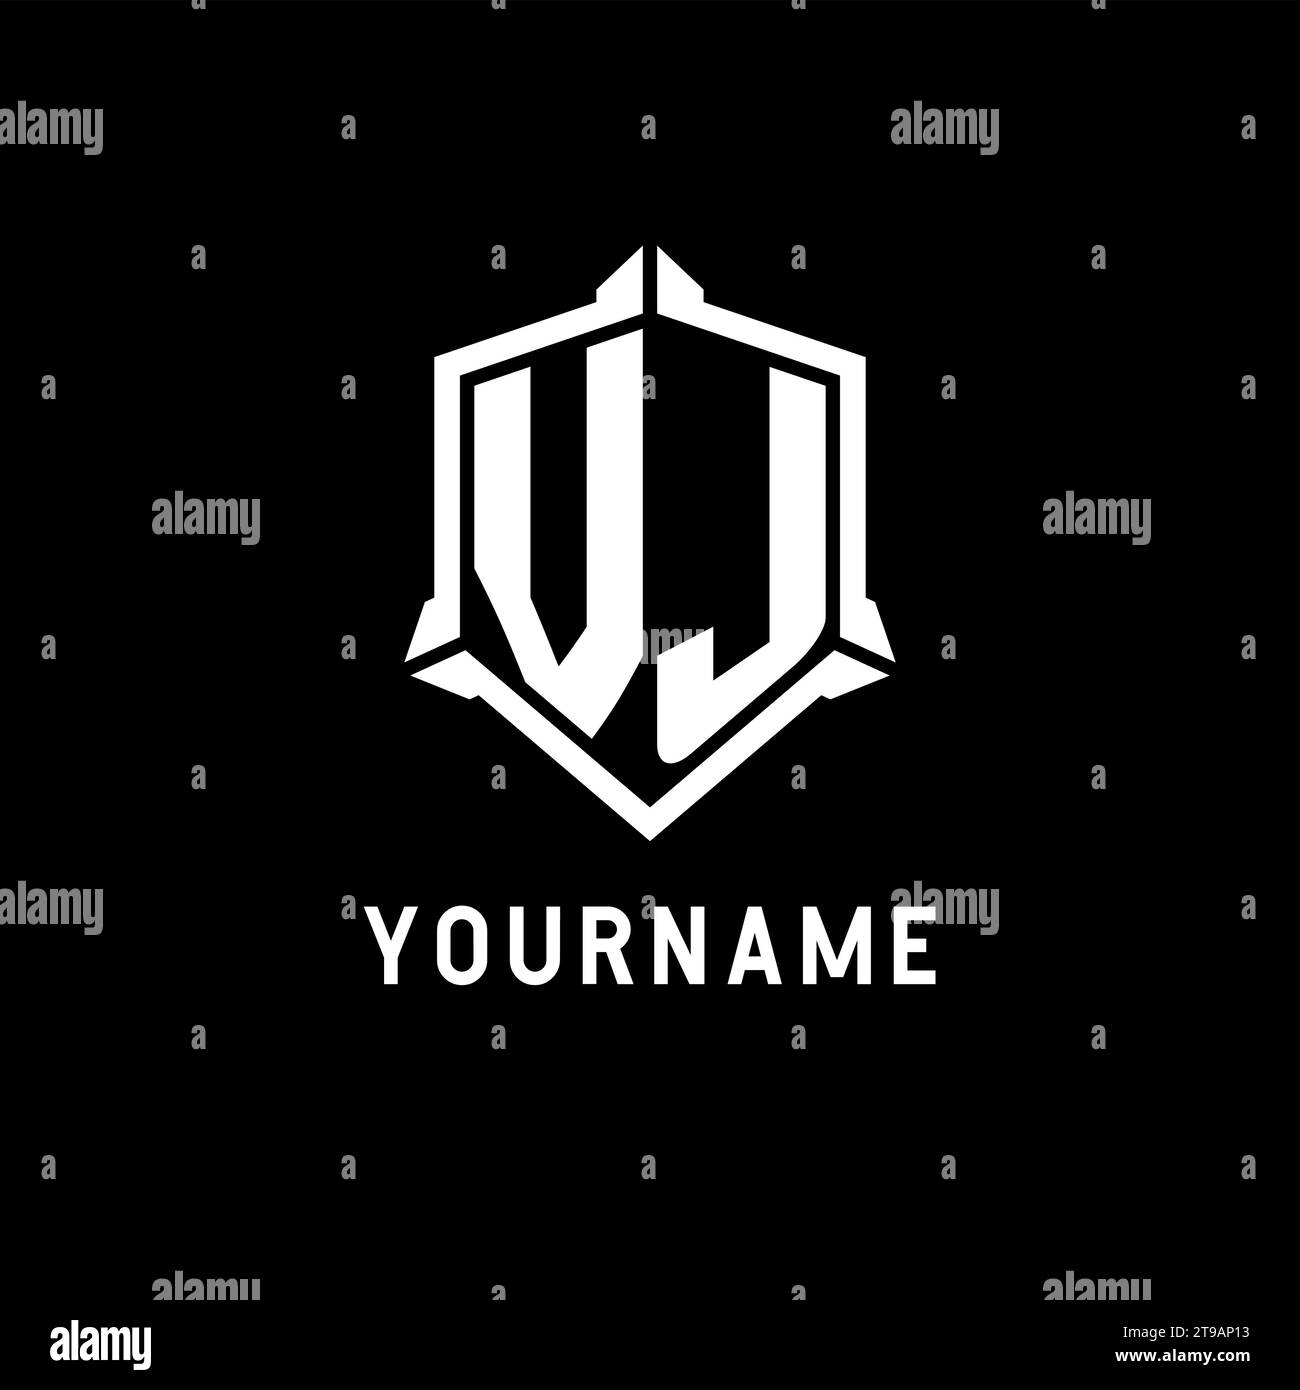 VJ logo initial with shield shape design style vector graphic Stock Vector